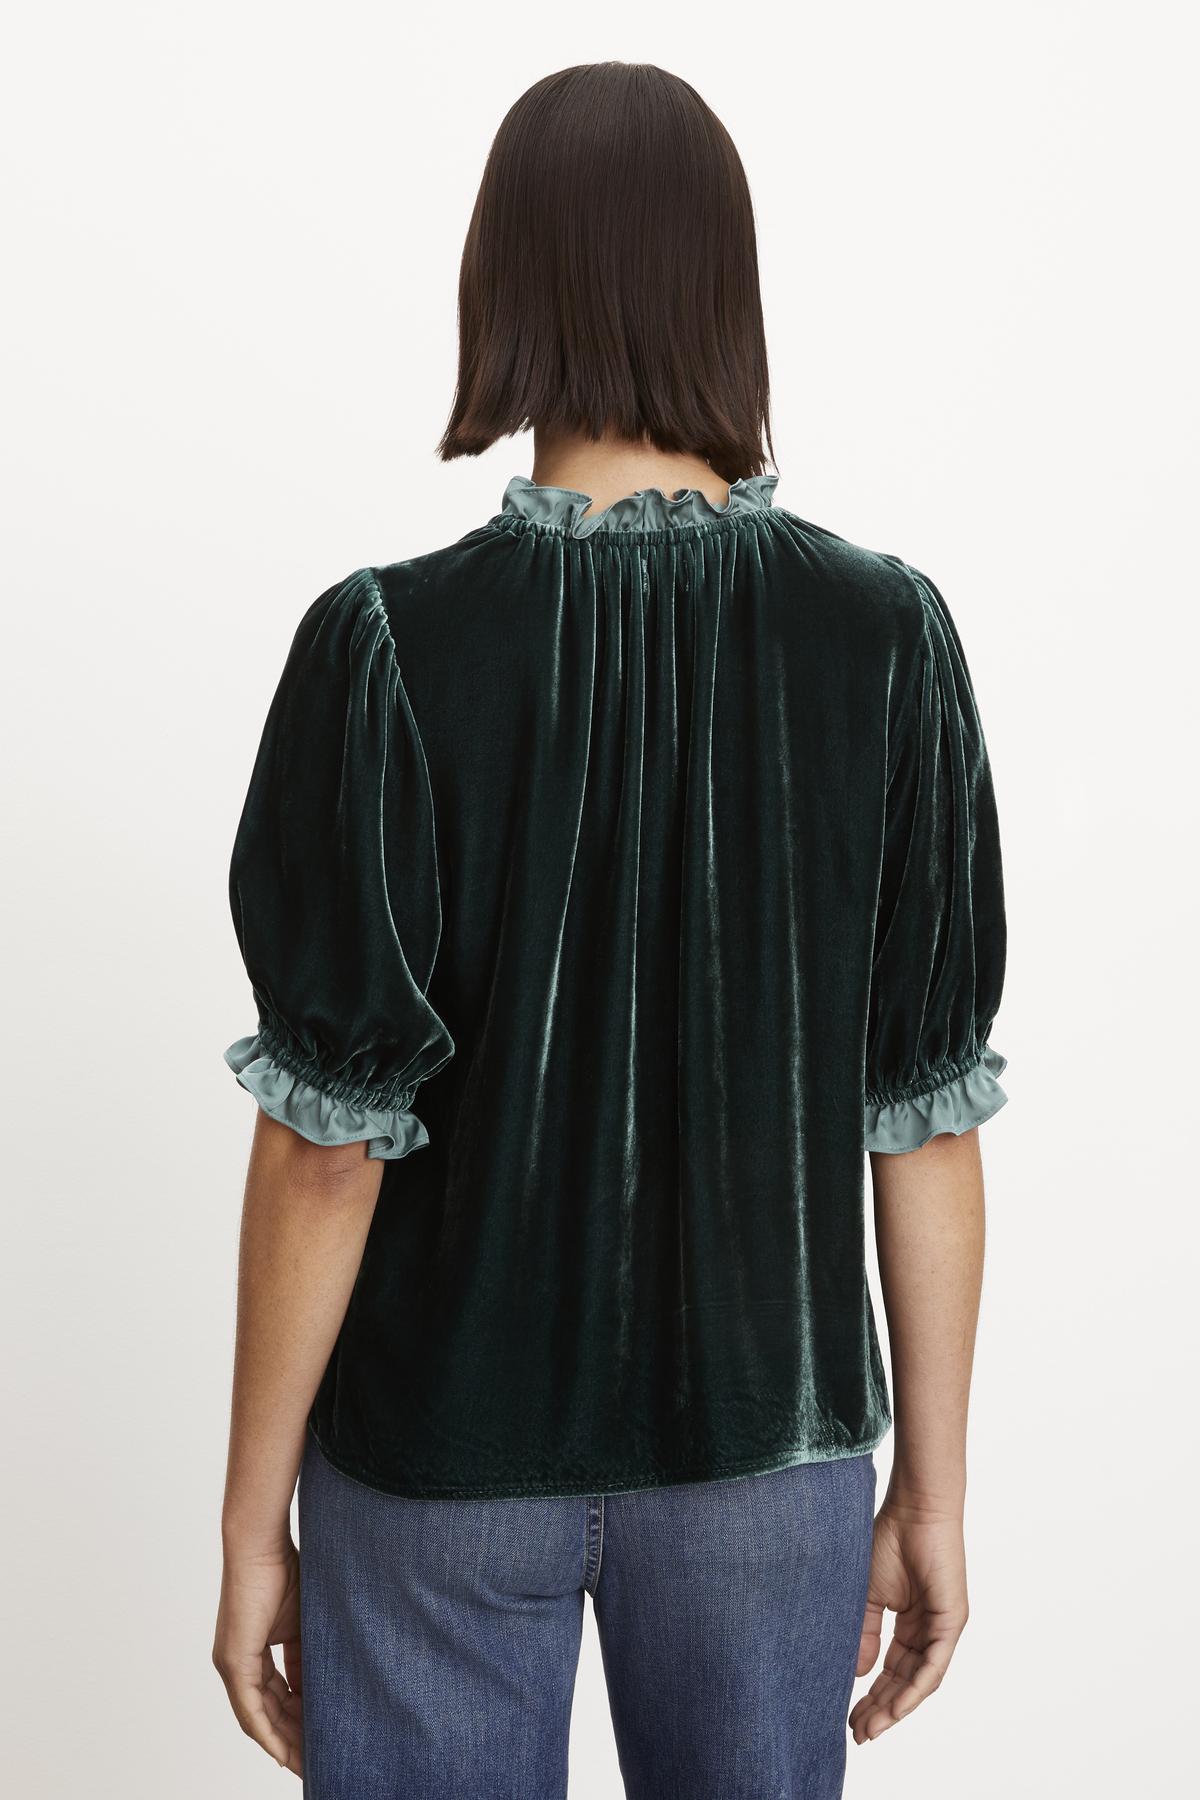 The back view of a woman wearing a Velvet by Graham & Spencer VAL SILK VELVET TOP with elastic ruffle neckline.-35654473220289